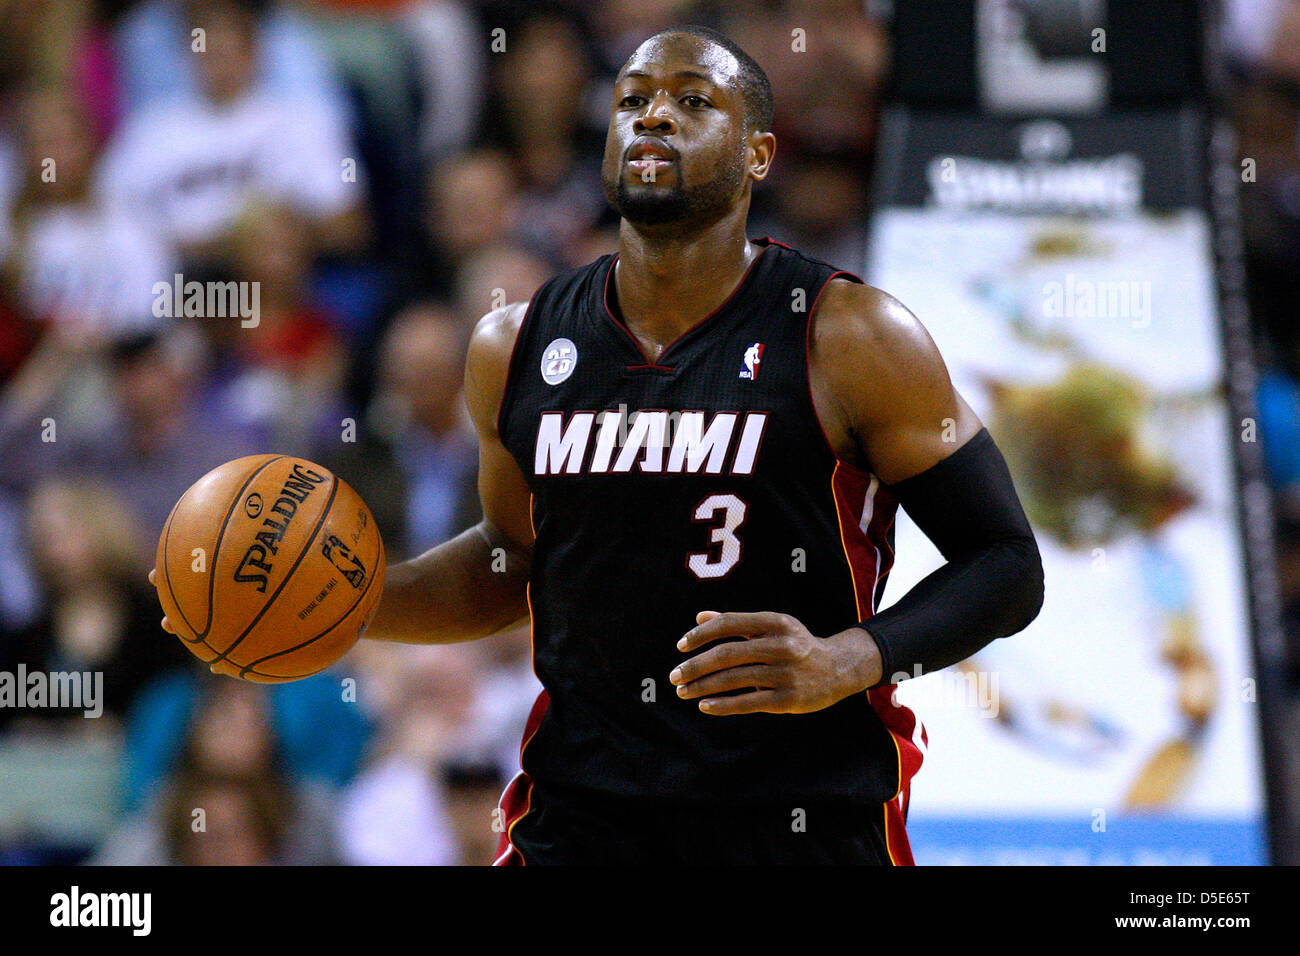 March 29, 2013 - New Orleans, Louisiana, United States of America - March 29, 2013: Miami Heat shooting guard Dwyane Wade (3) drives with the ball during the NBA basketball game between the New Orleans Hornets and the Miami Heat at the New Orleans Arena in New Orleans, LA. Stock Photo